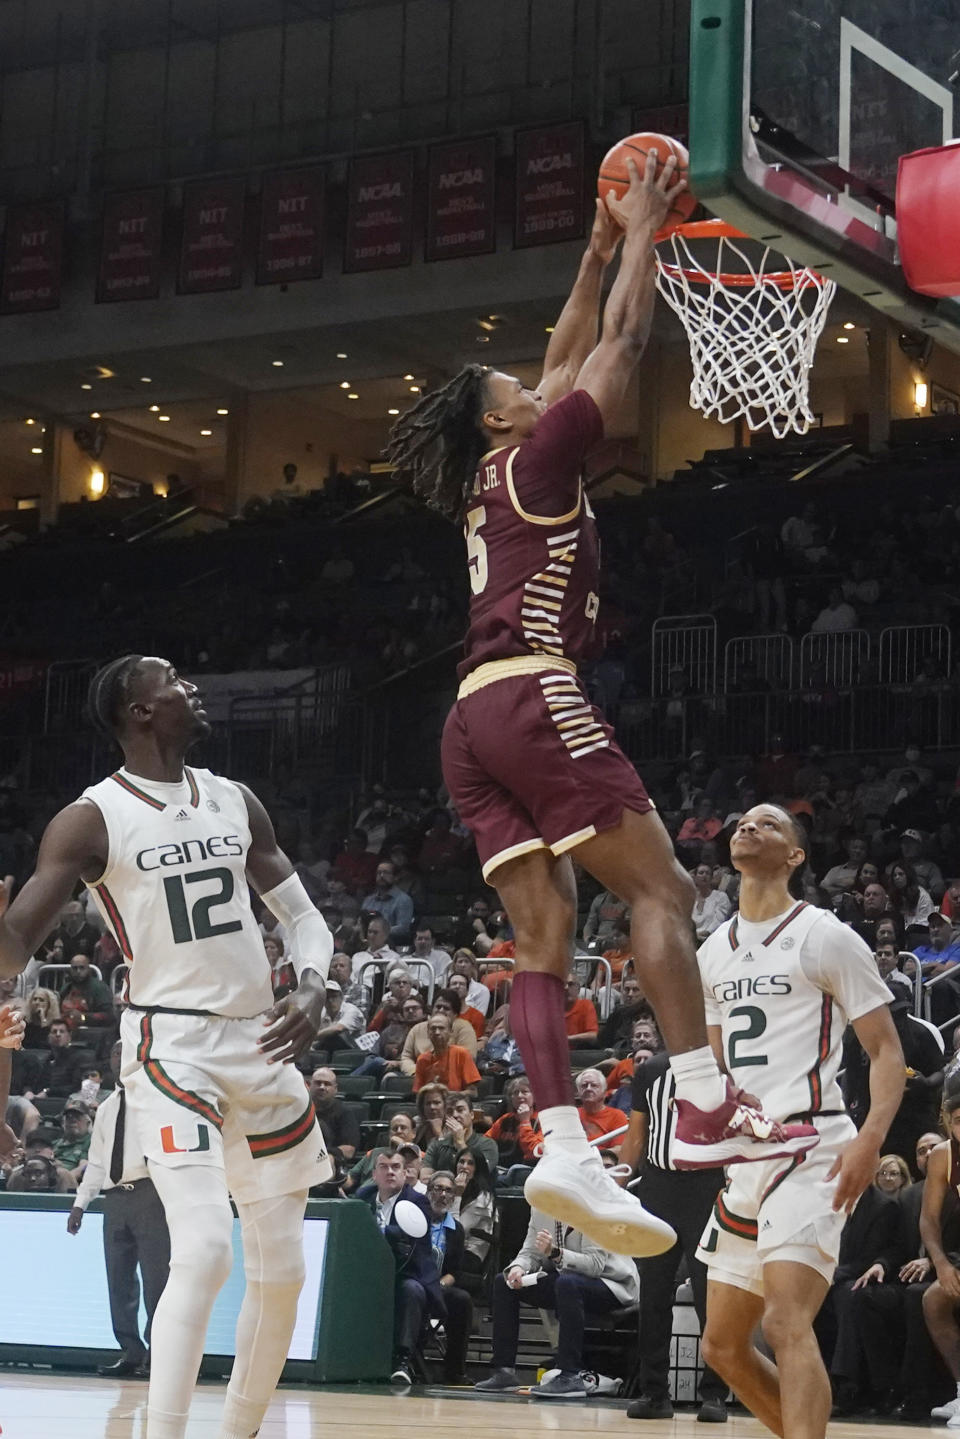 Boston College guard DeMarr Langford Jr. (5) dunks the ball during the second half of an NCAA college basketball game against Miami , Wednesday, Jan. 11, 2023, in Coral Gables, Fla. (AP Photo/Marta Lavandier)